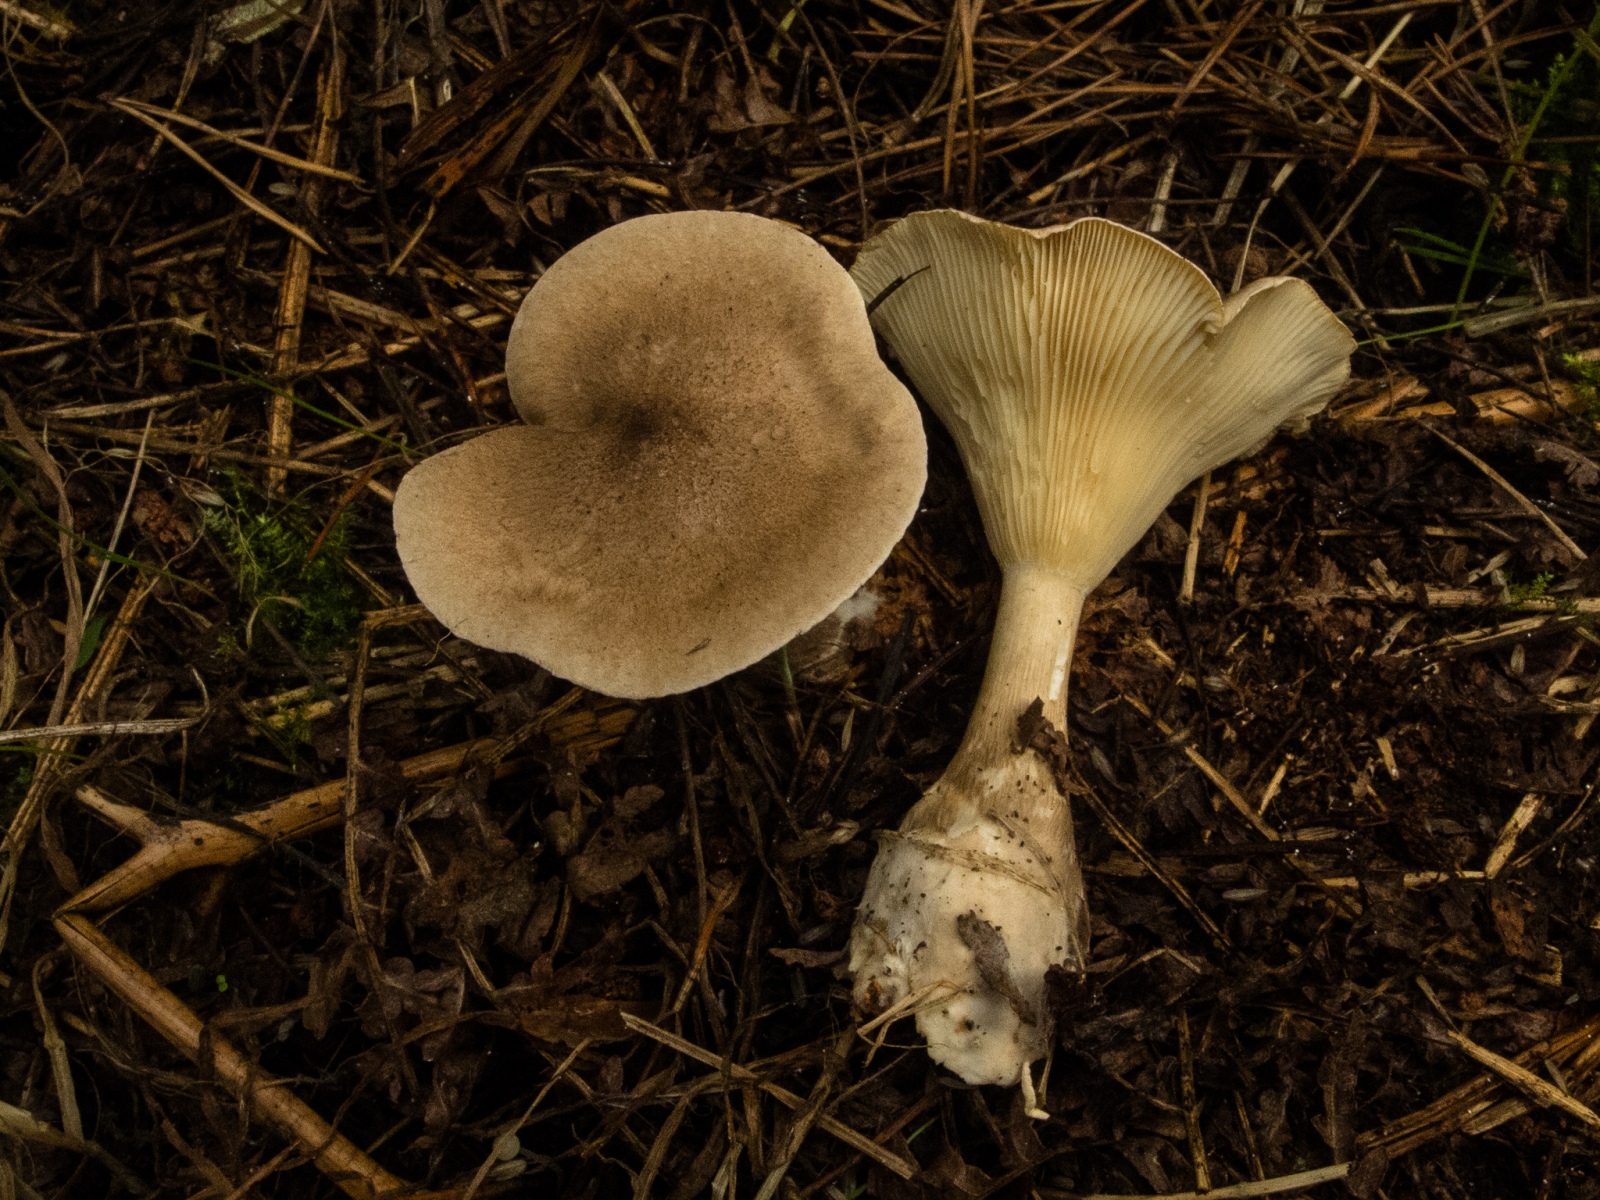 Clitocybe clavipes - Club Foot, Conjure Alders, Notts.